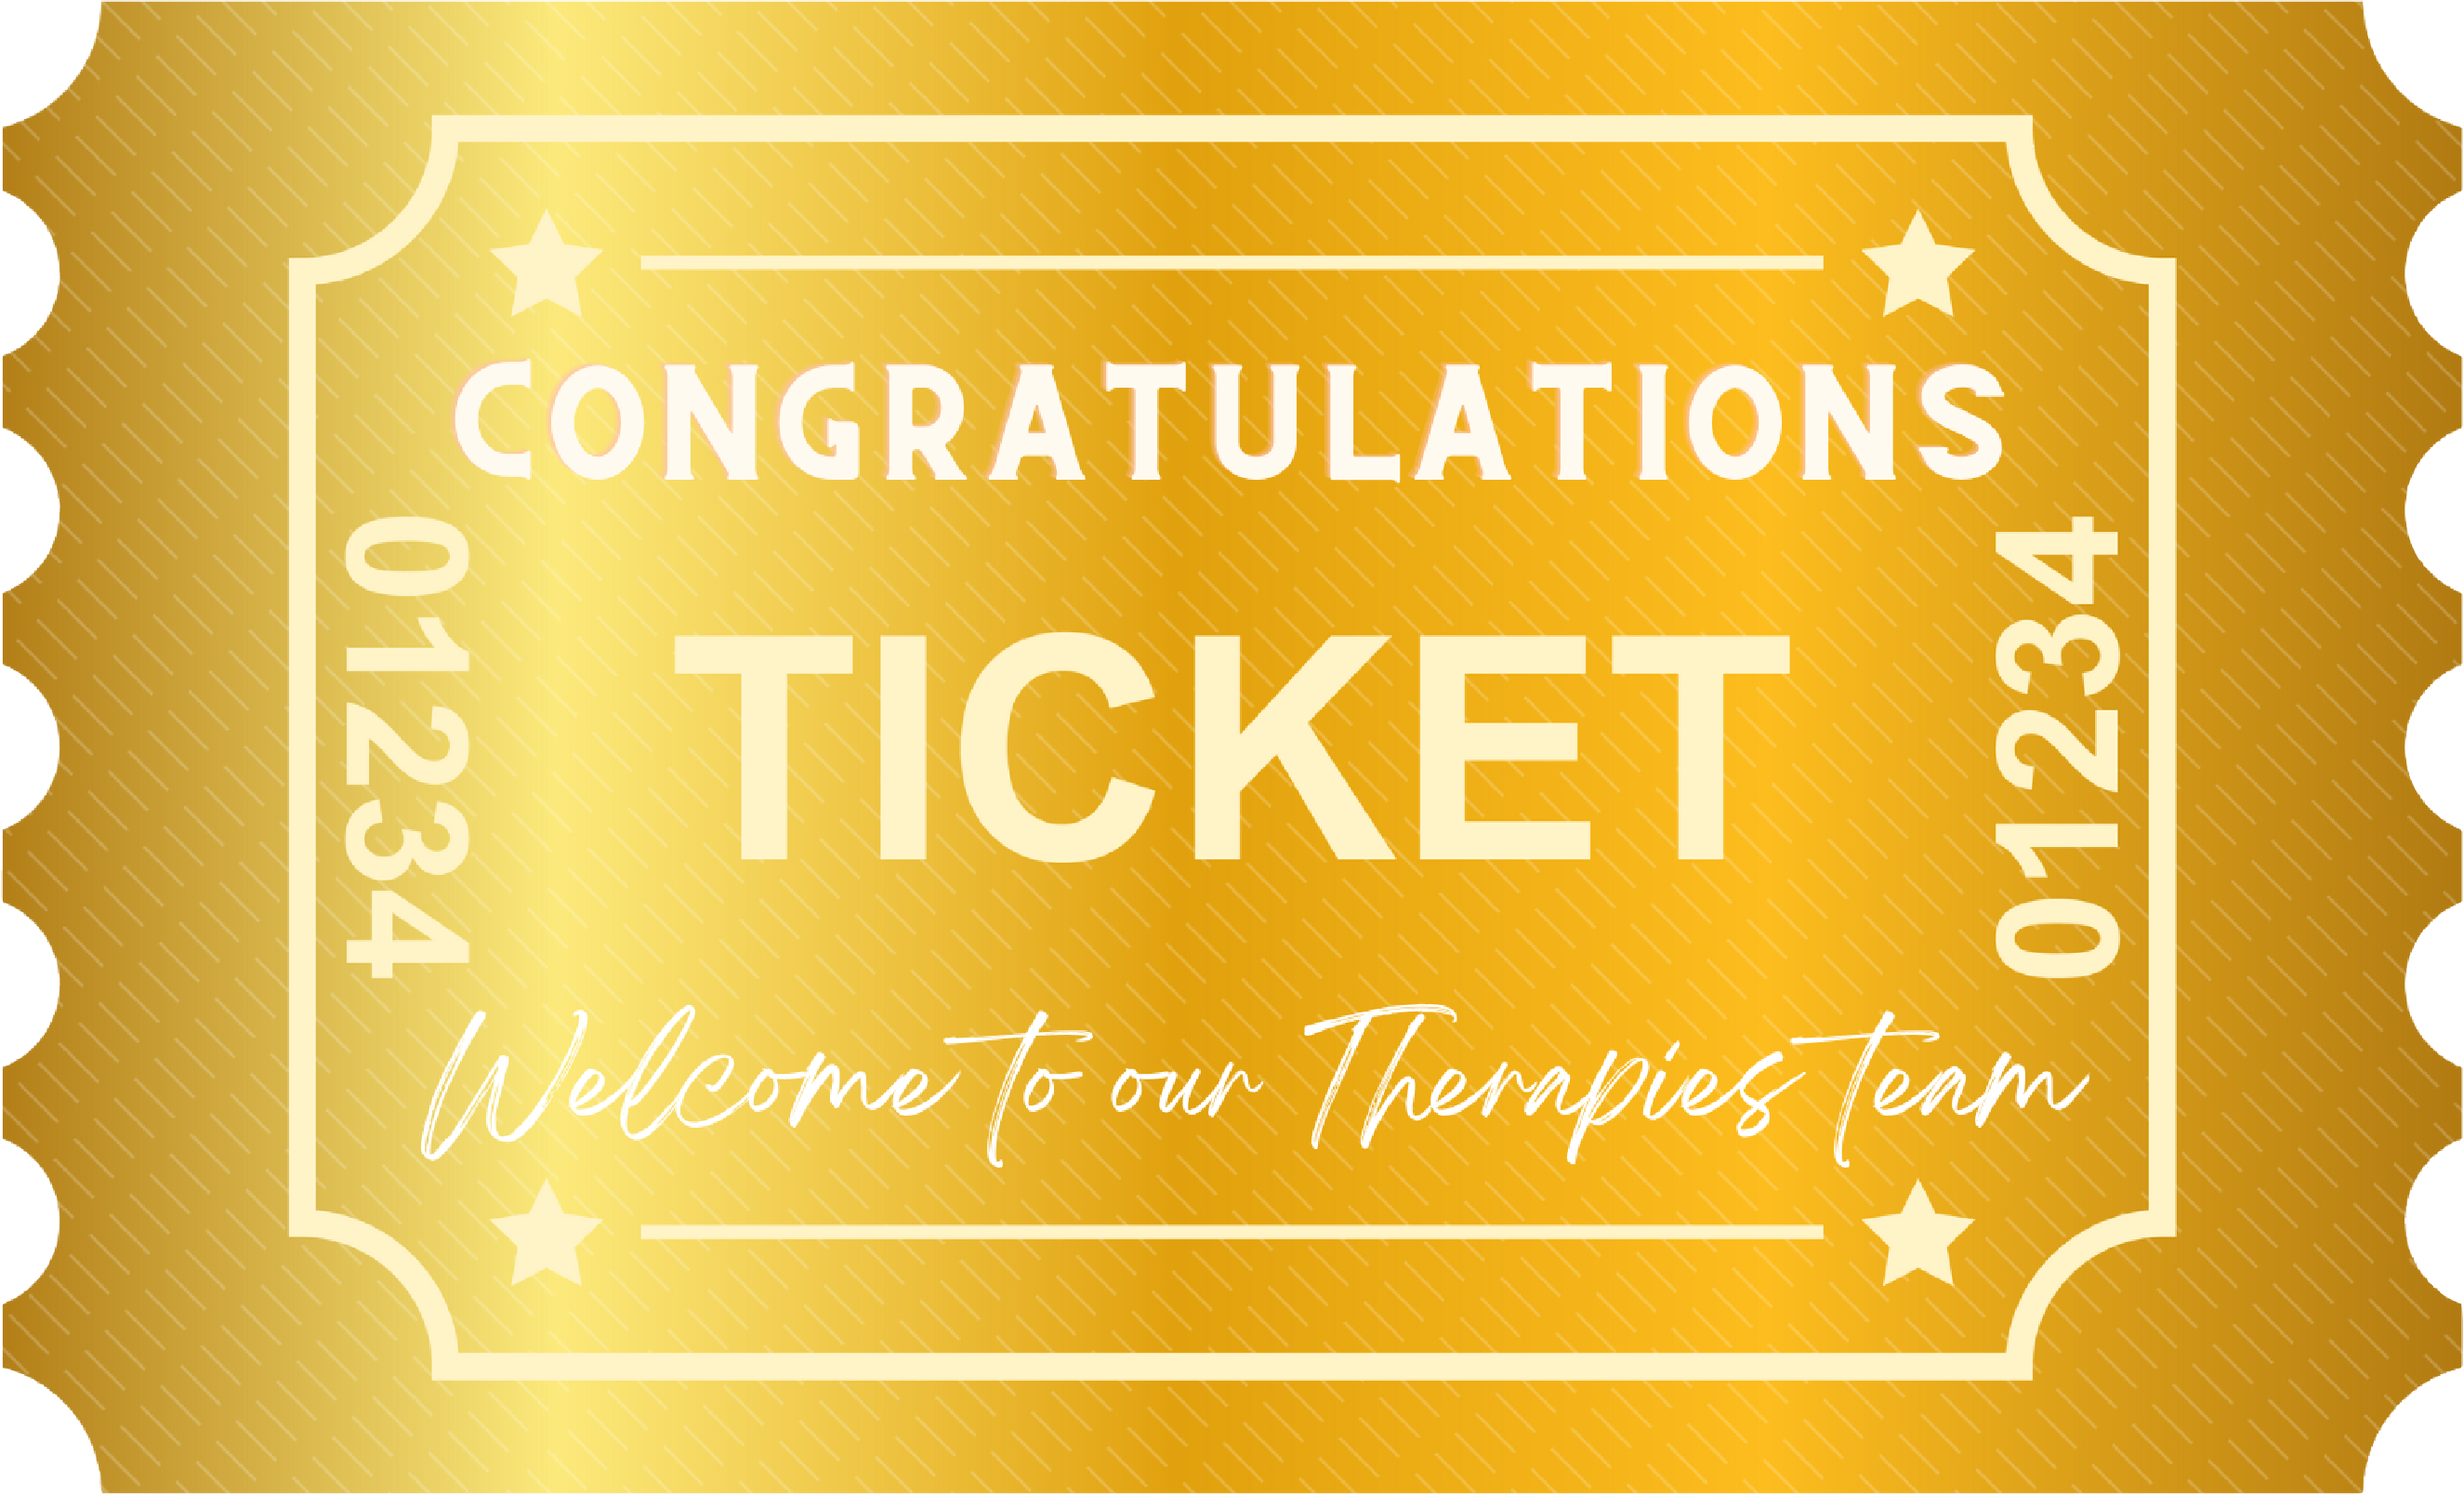 The golden ticket that will be given to outstanding final year therapies students